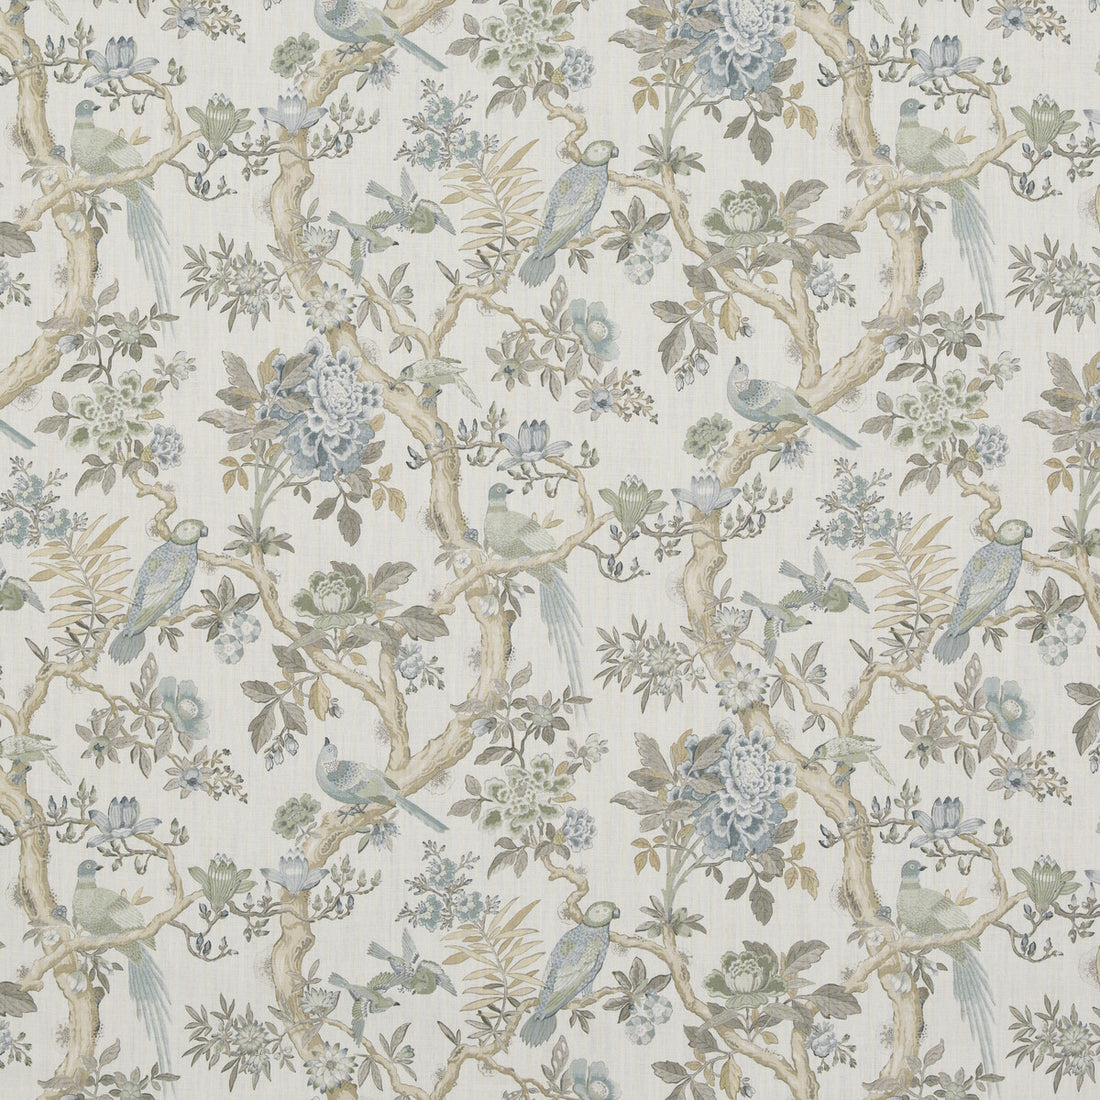 Eltham fabric in aqua color - pattern BP10948.4.0 - by G P &amp; J Baker in the Ashmore collection